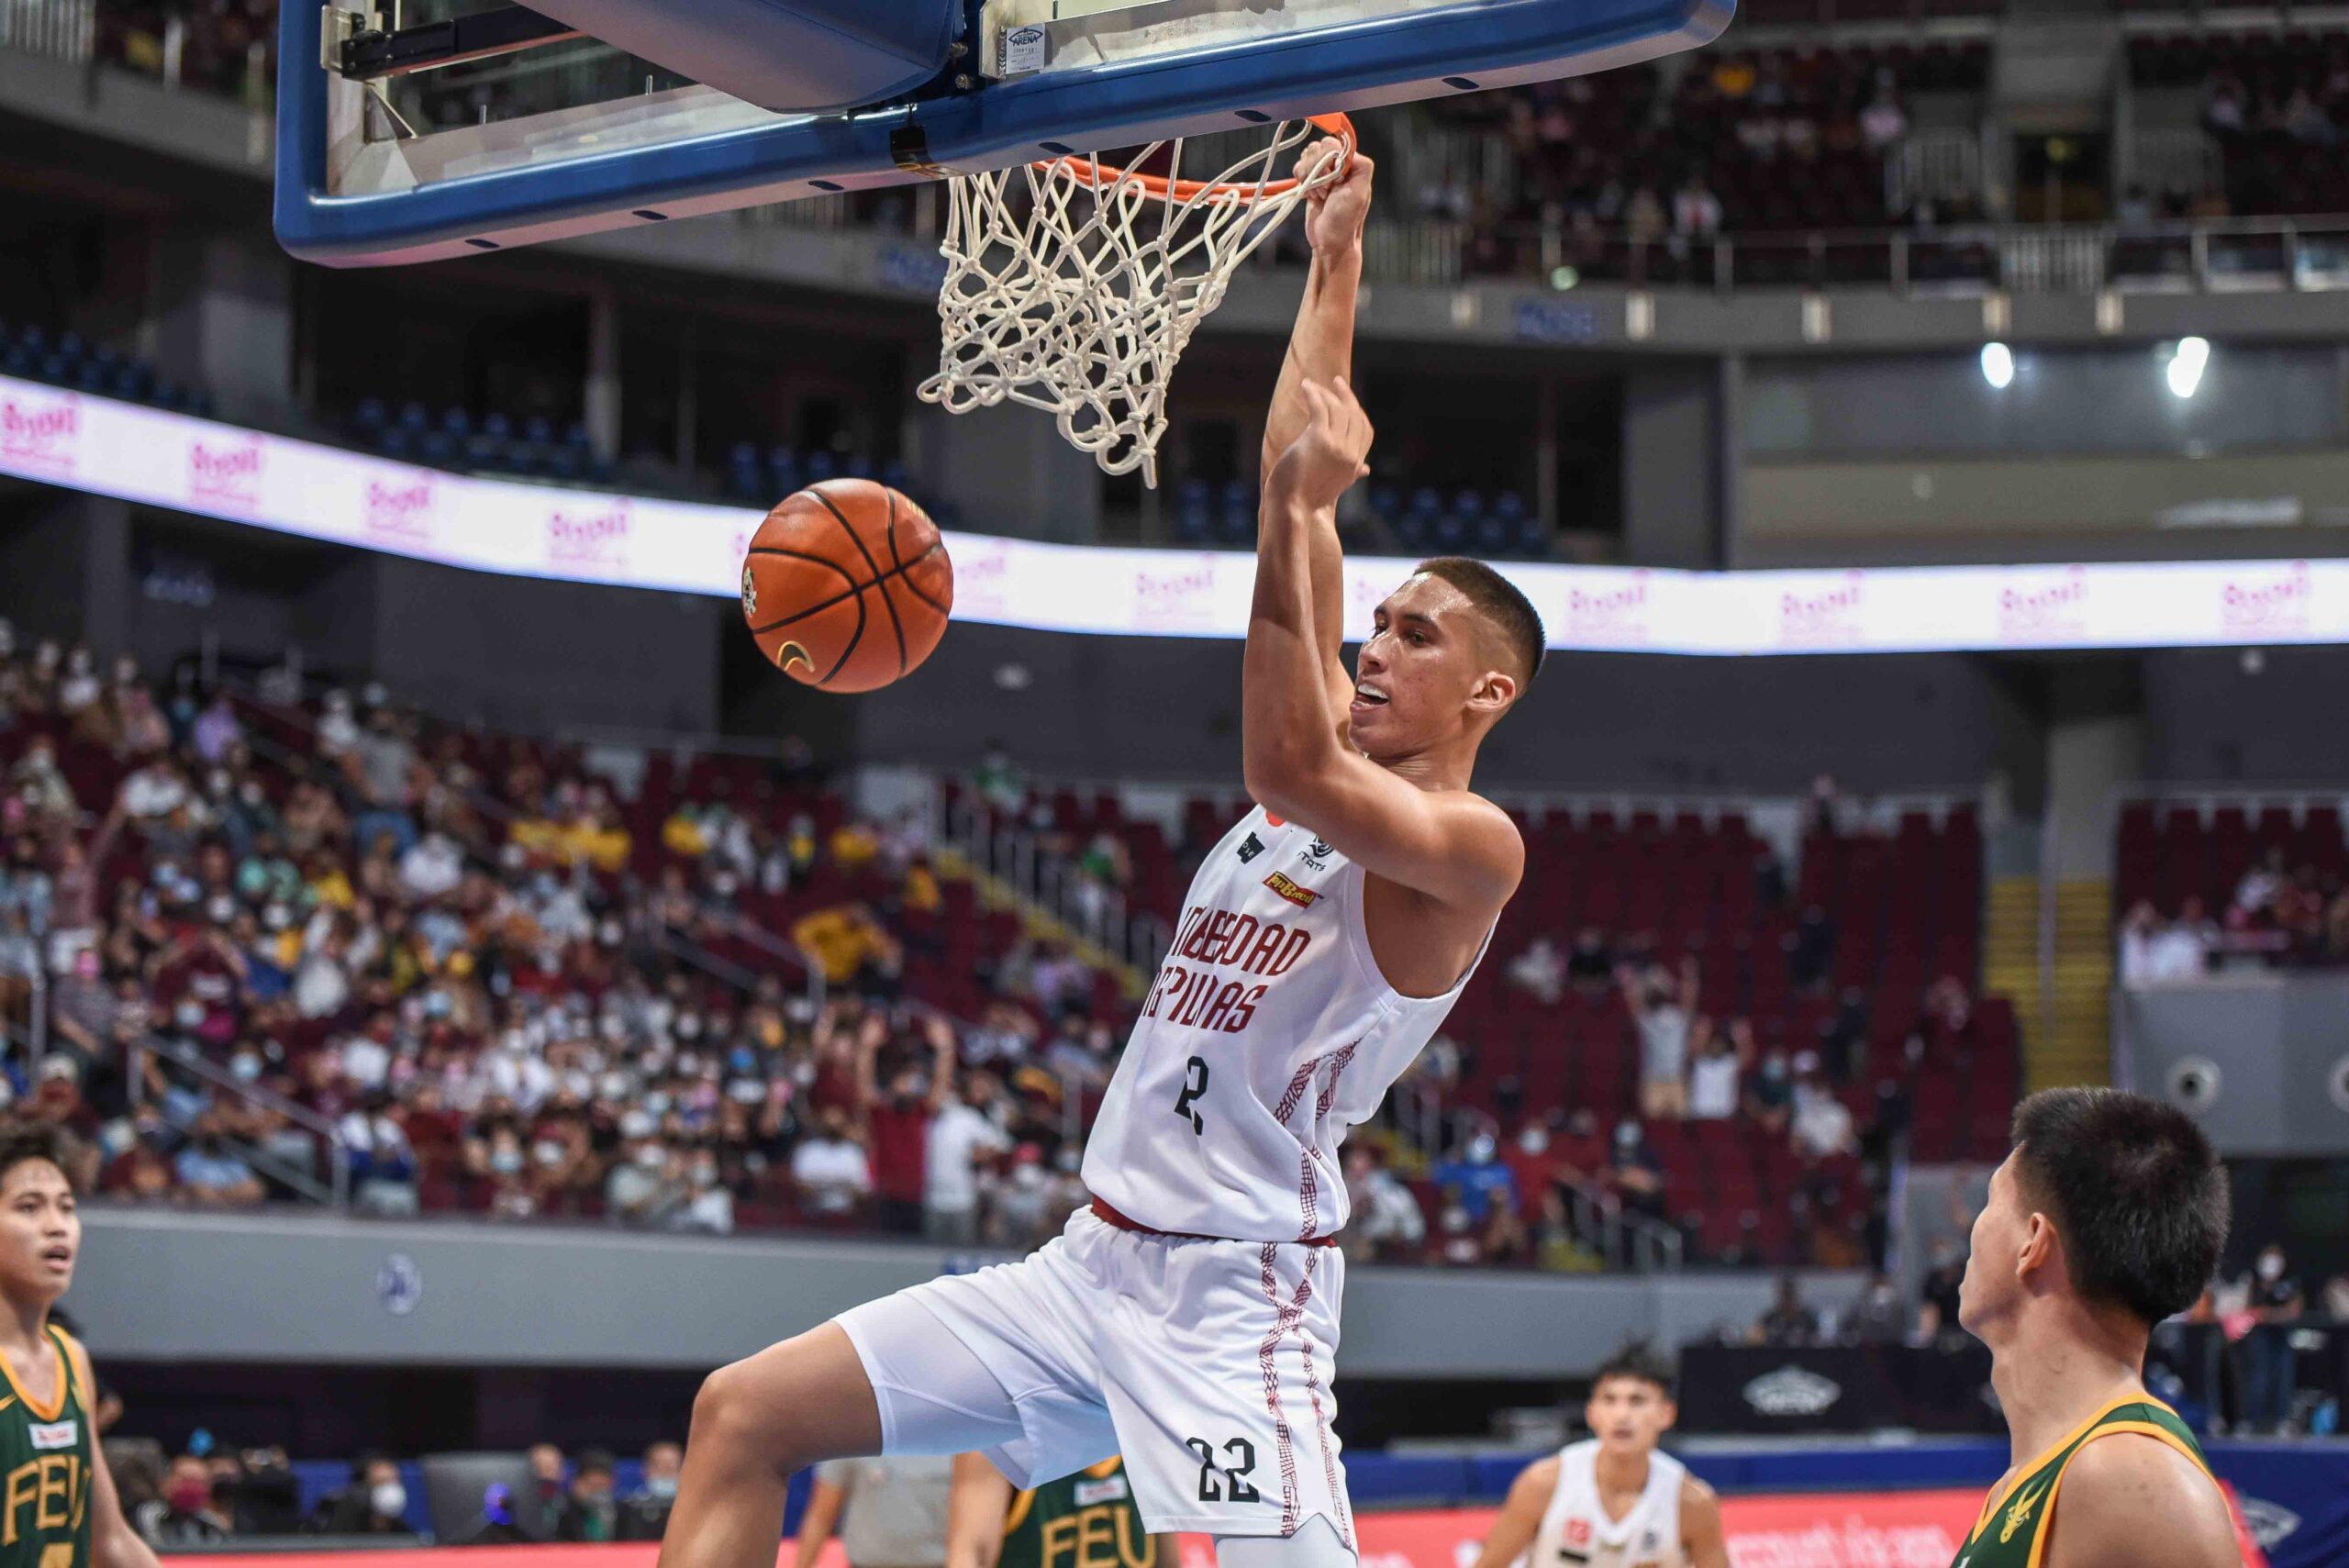 Lucero’s Career-High, Tamayo and Rivero’s Clutch Shots Key in UP’s 6th Straight Win